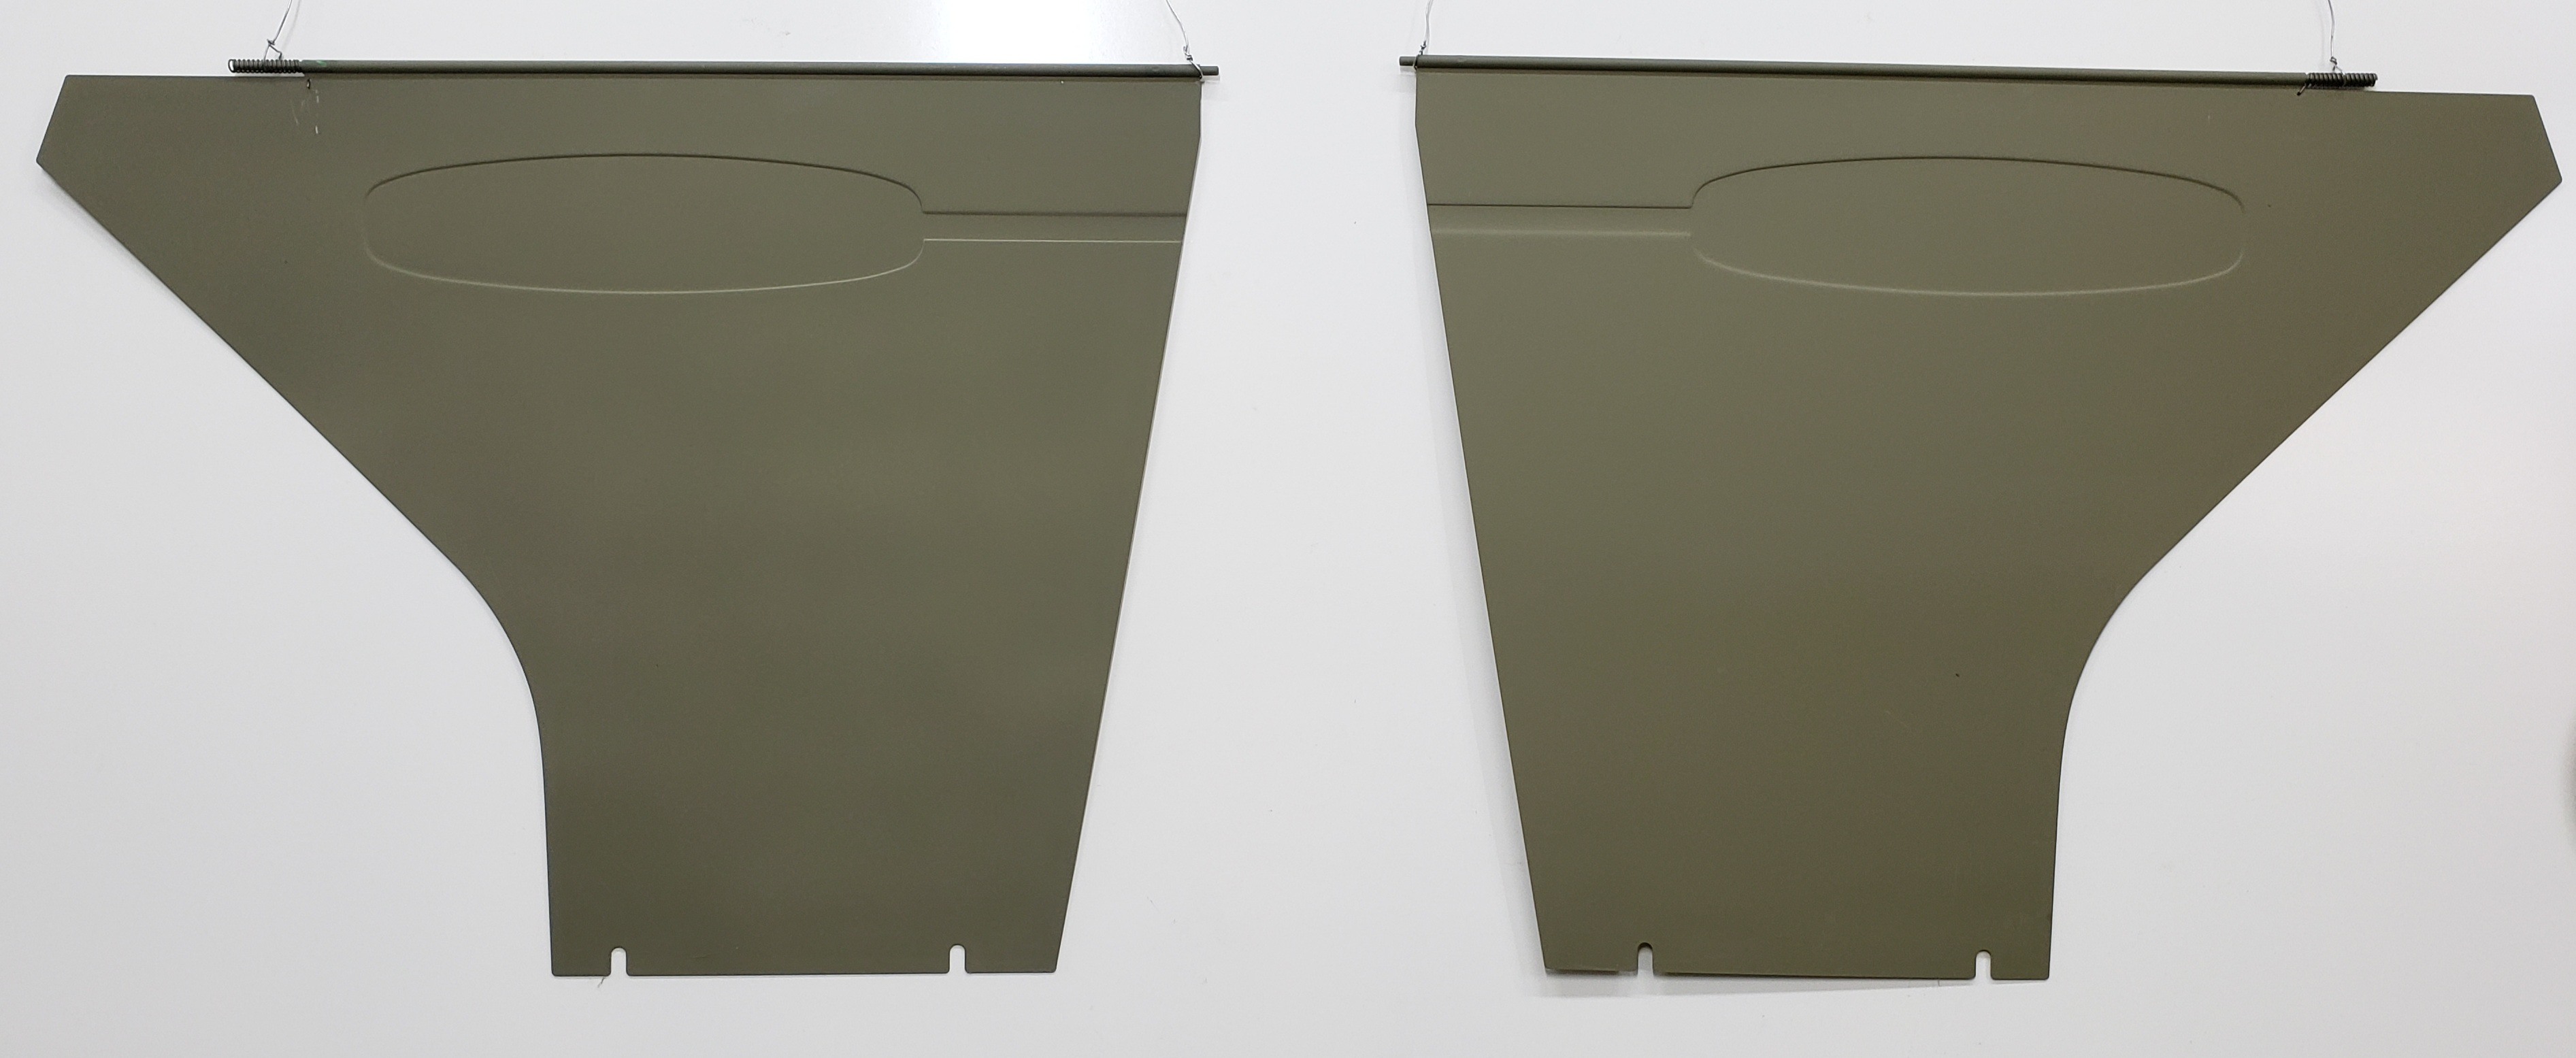 PAIR REAR ENGINE SIDE COVERS W/ DECAL RECESS FOR 770